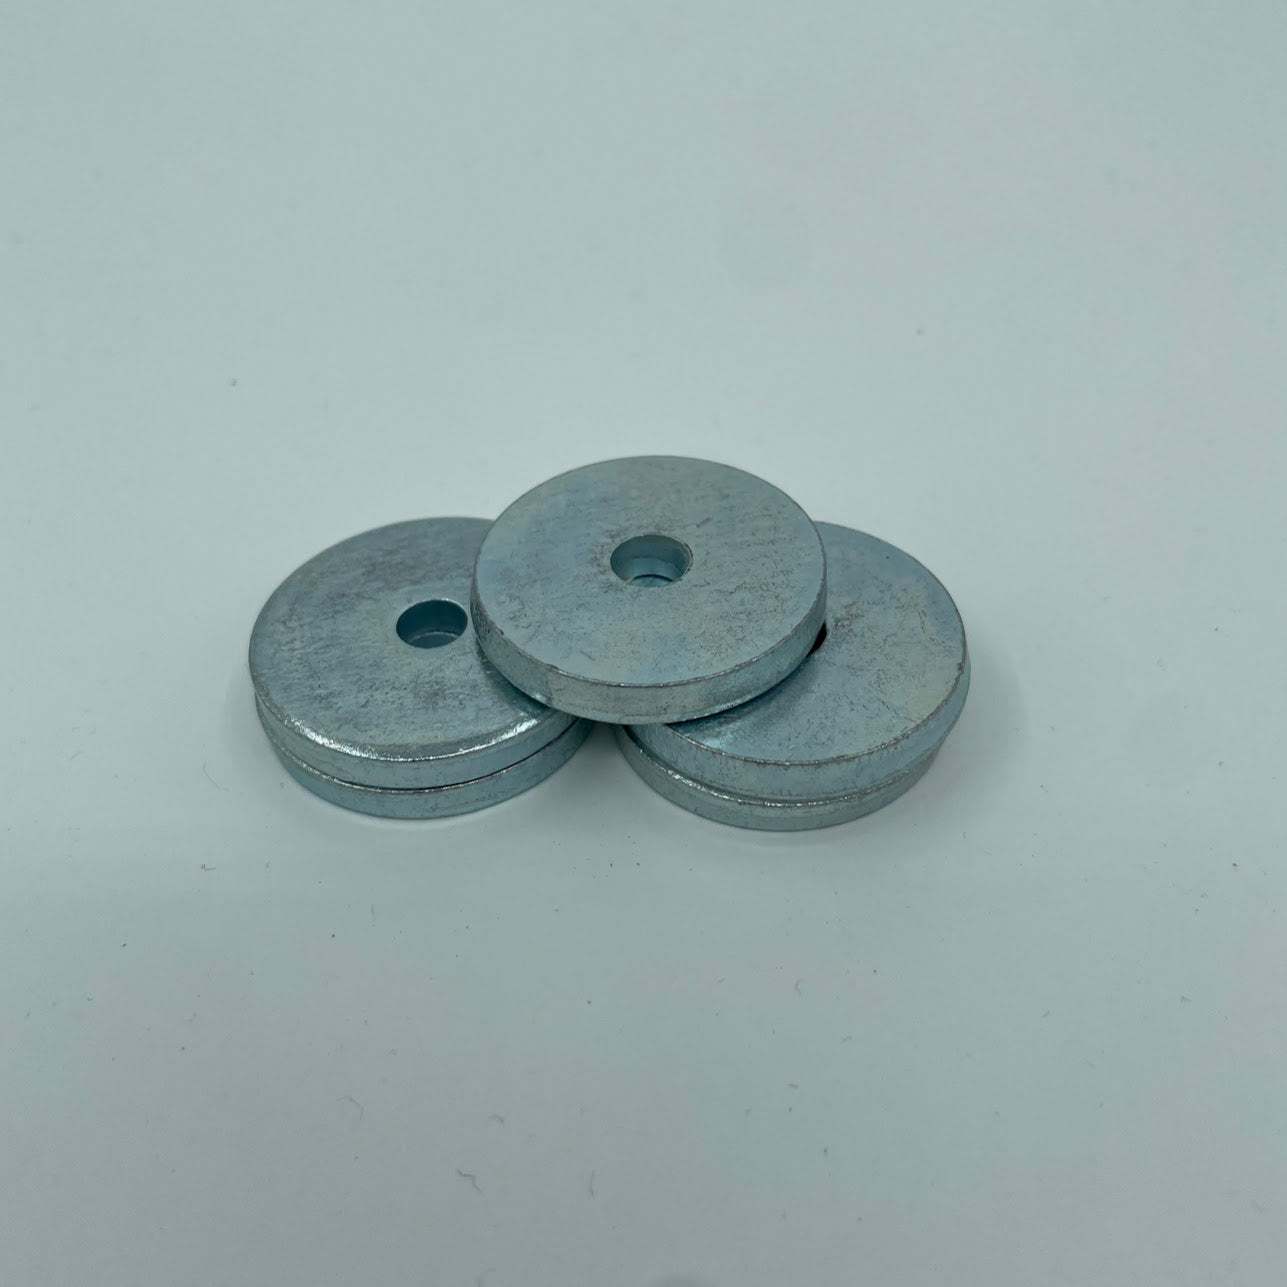 Extra Thick 1.5 inch Pattern Weight / Metal Washer - 5 Pack - New Thicker Style